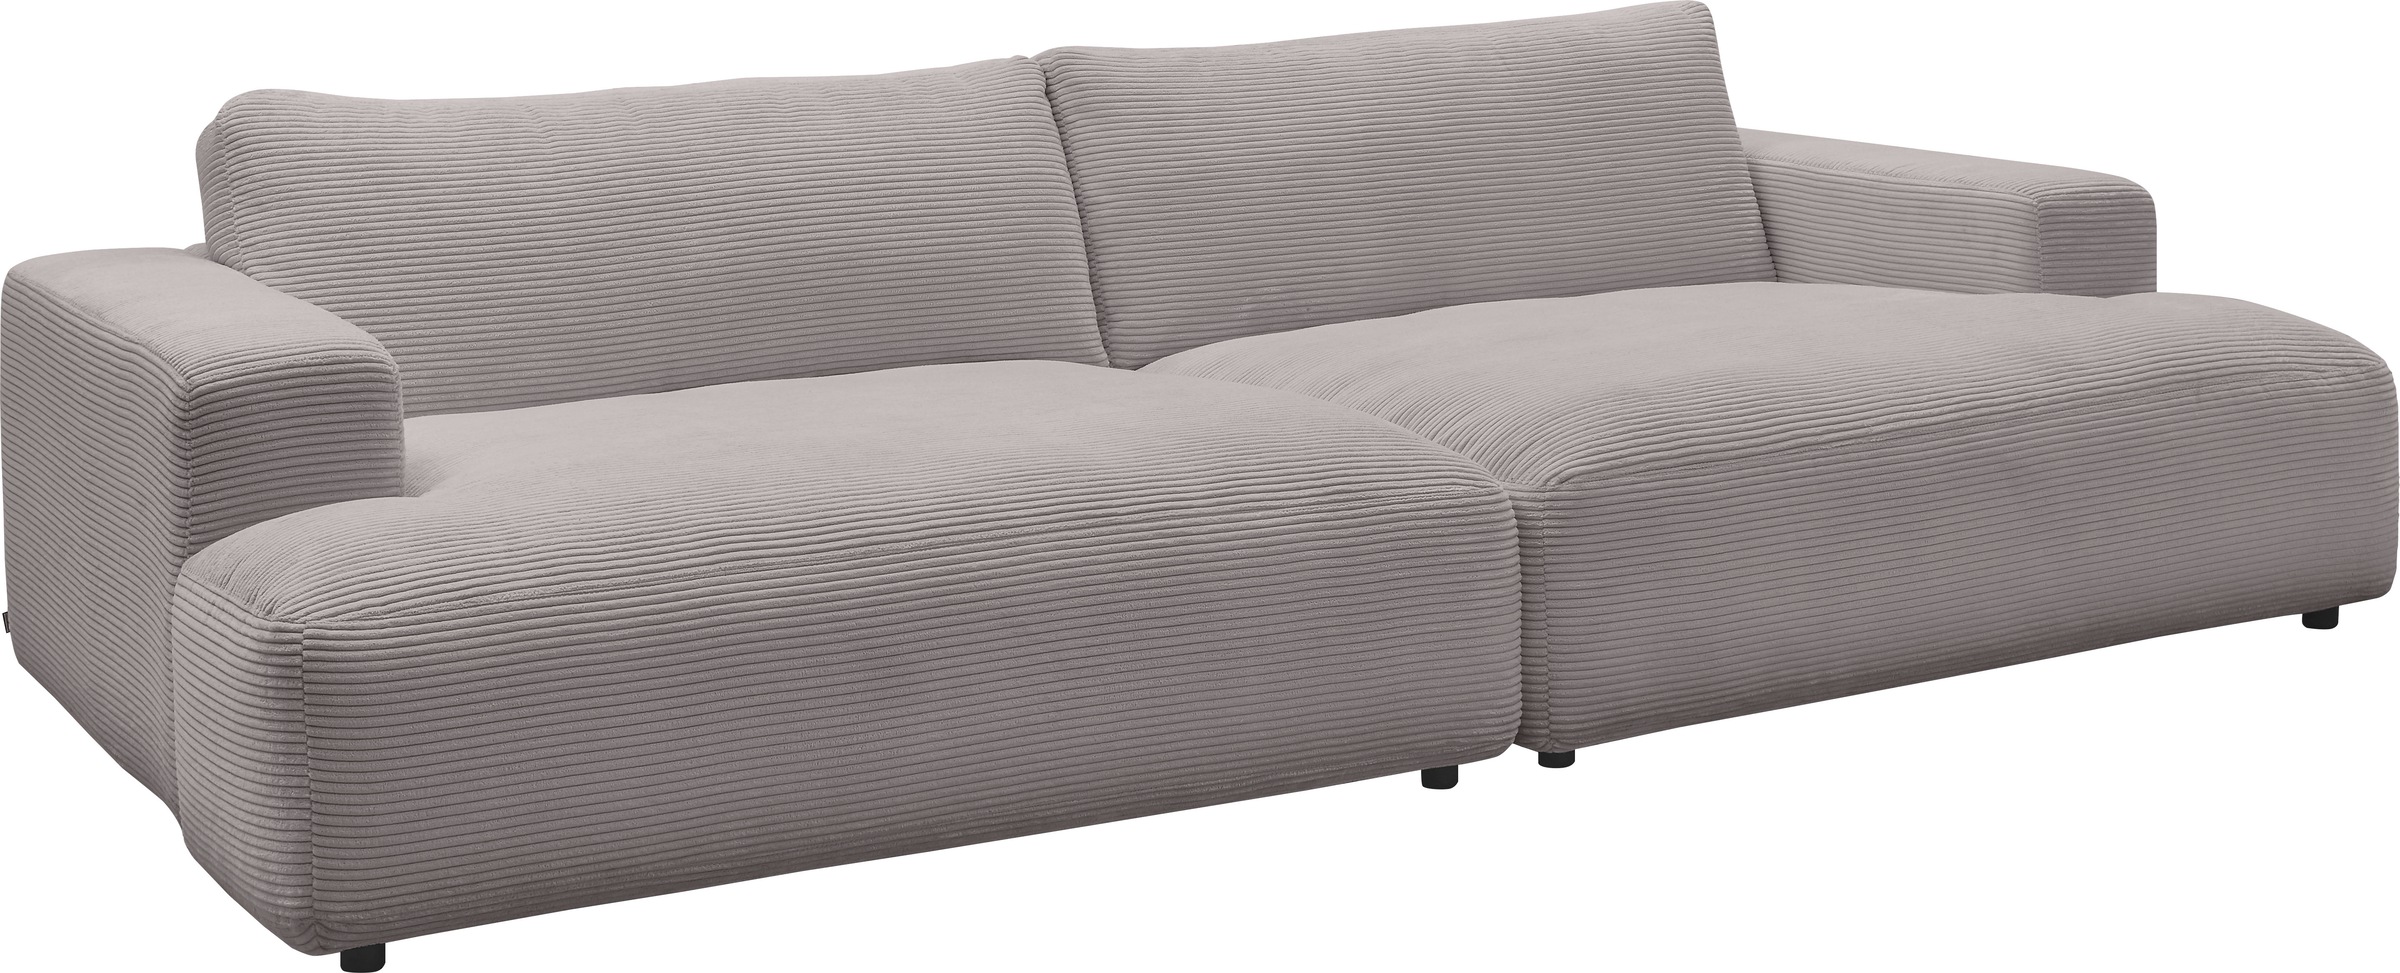 cm M OTTO Online GALLERY Loungesofa Shop Breite »Lucia«, Musterring by Cord-Bezug, branded 292